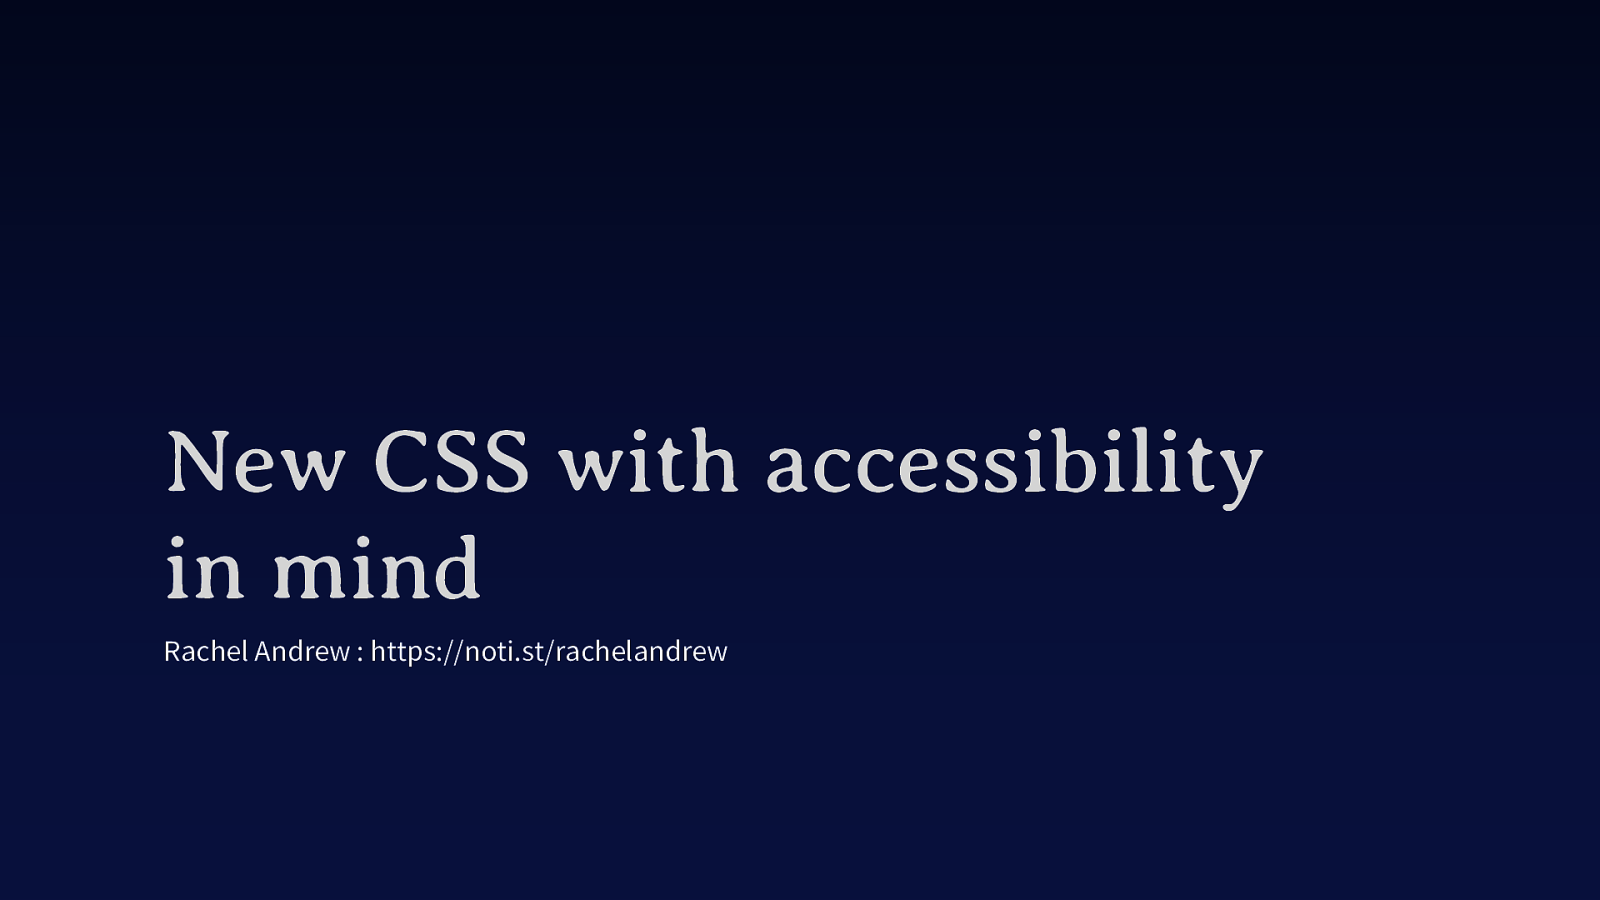 New CSS with accessibility in mind